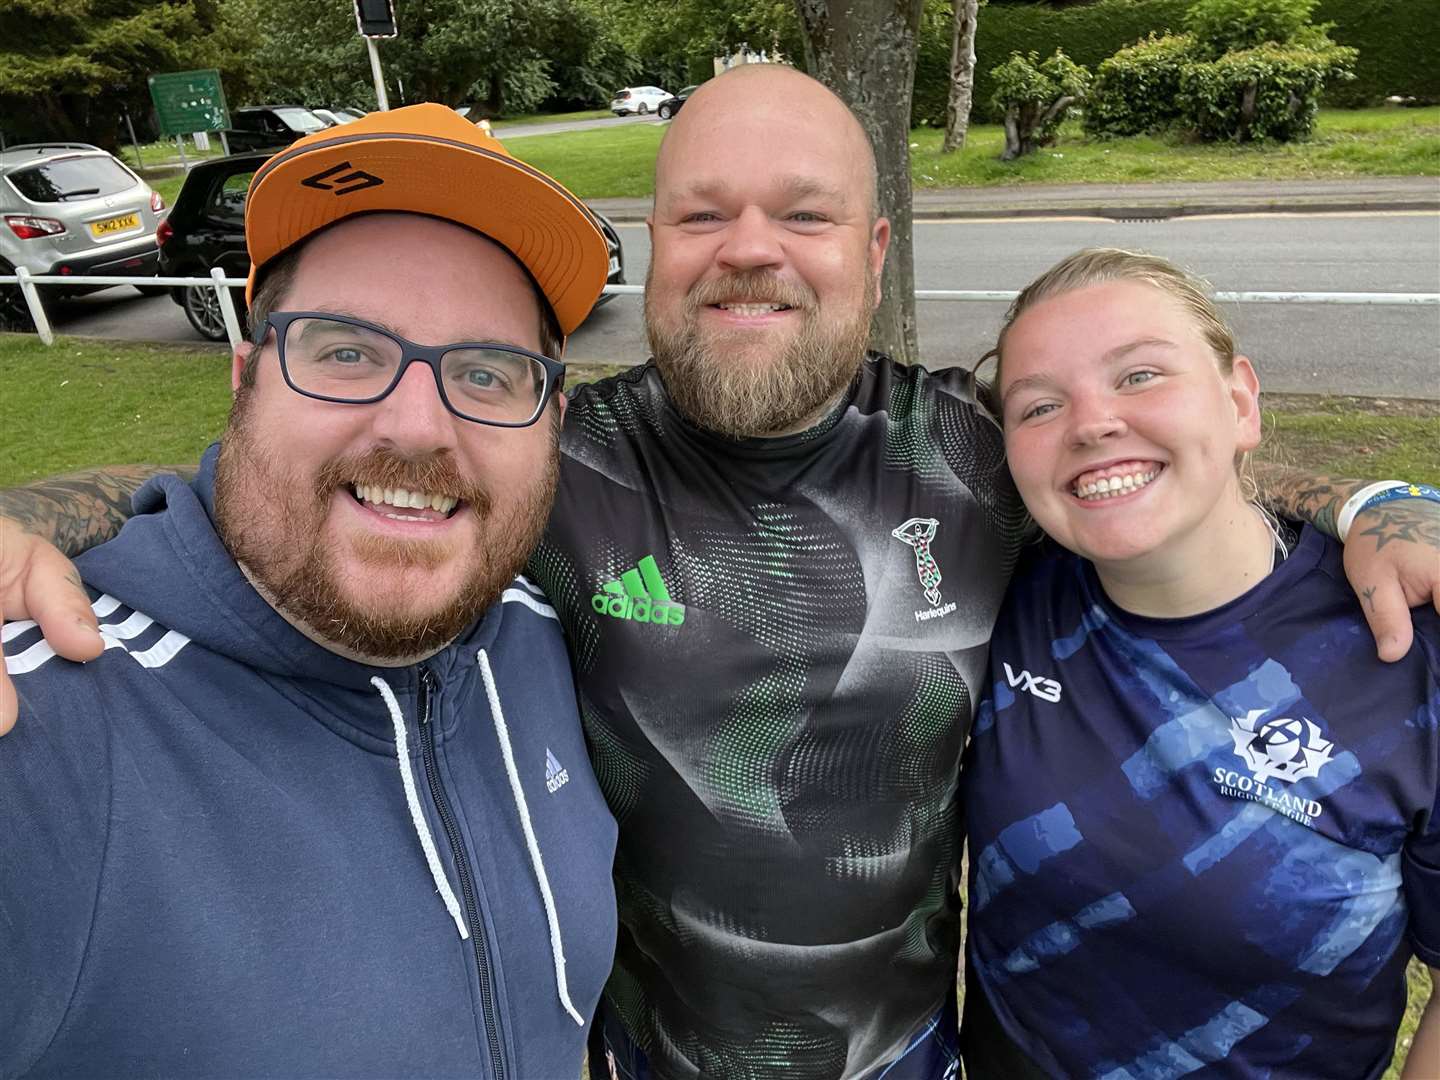 John Fitness, Fraser Craig and Hannah Chisholm will be representing the Inverness Lynx at this weekend's Pride In Touch tournament in Glasgow.